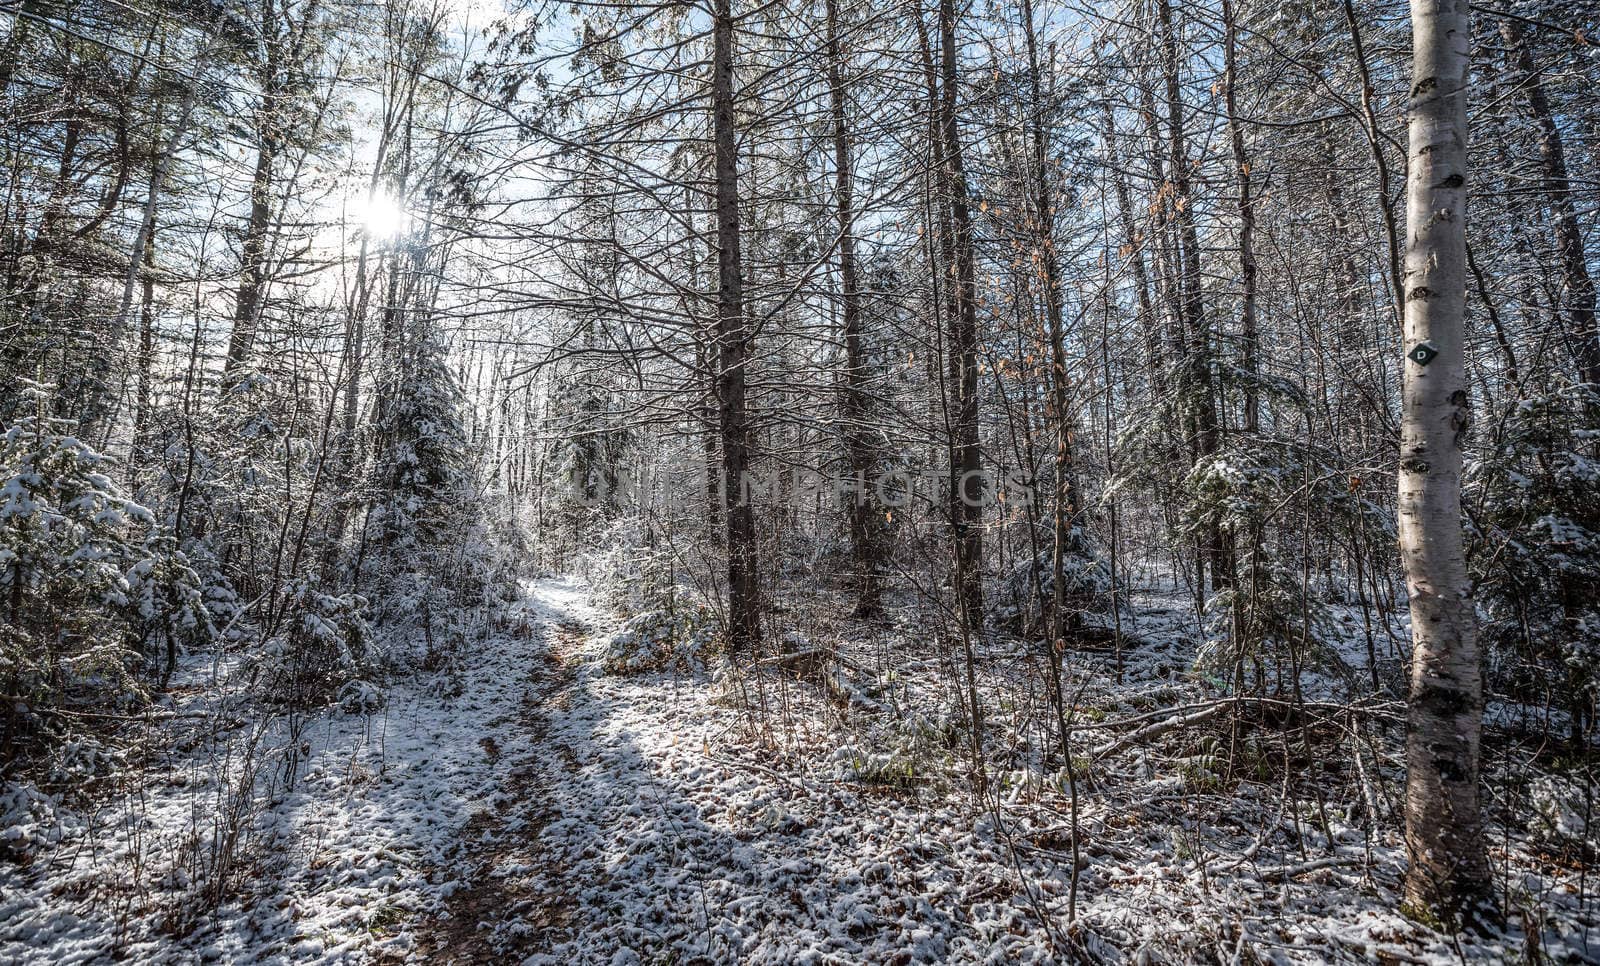 Light winter snow along a nature trail. by valleyboi63